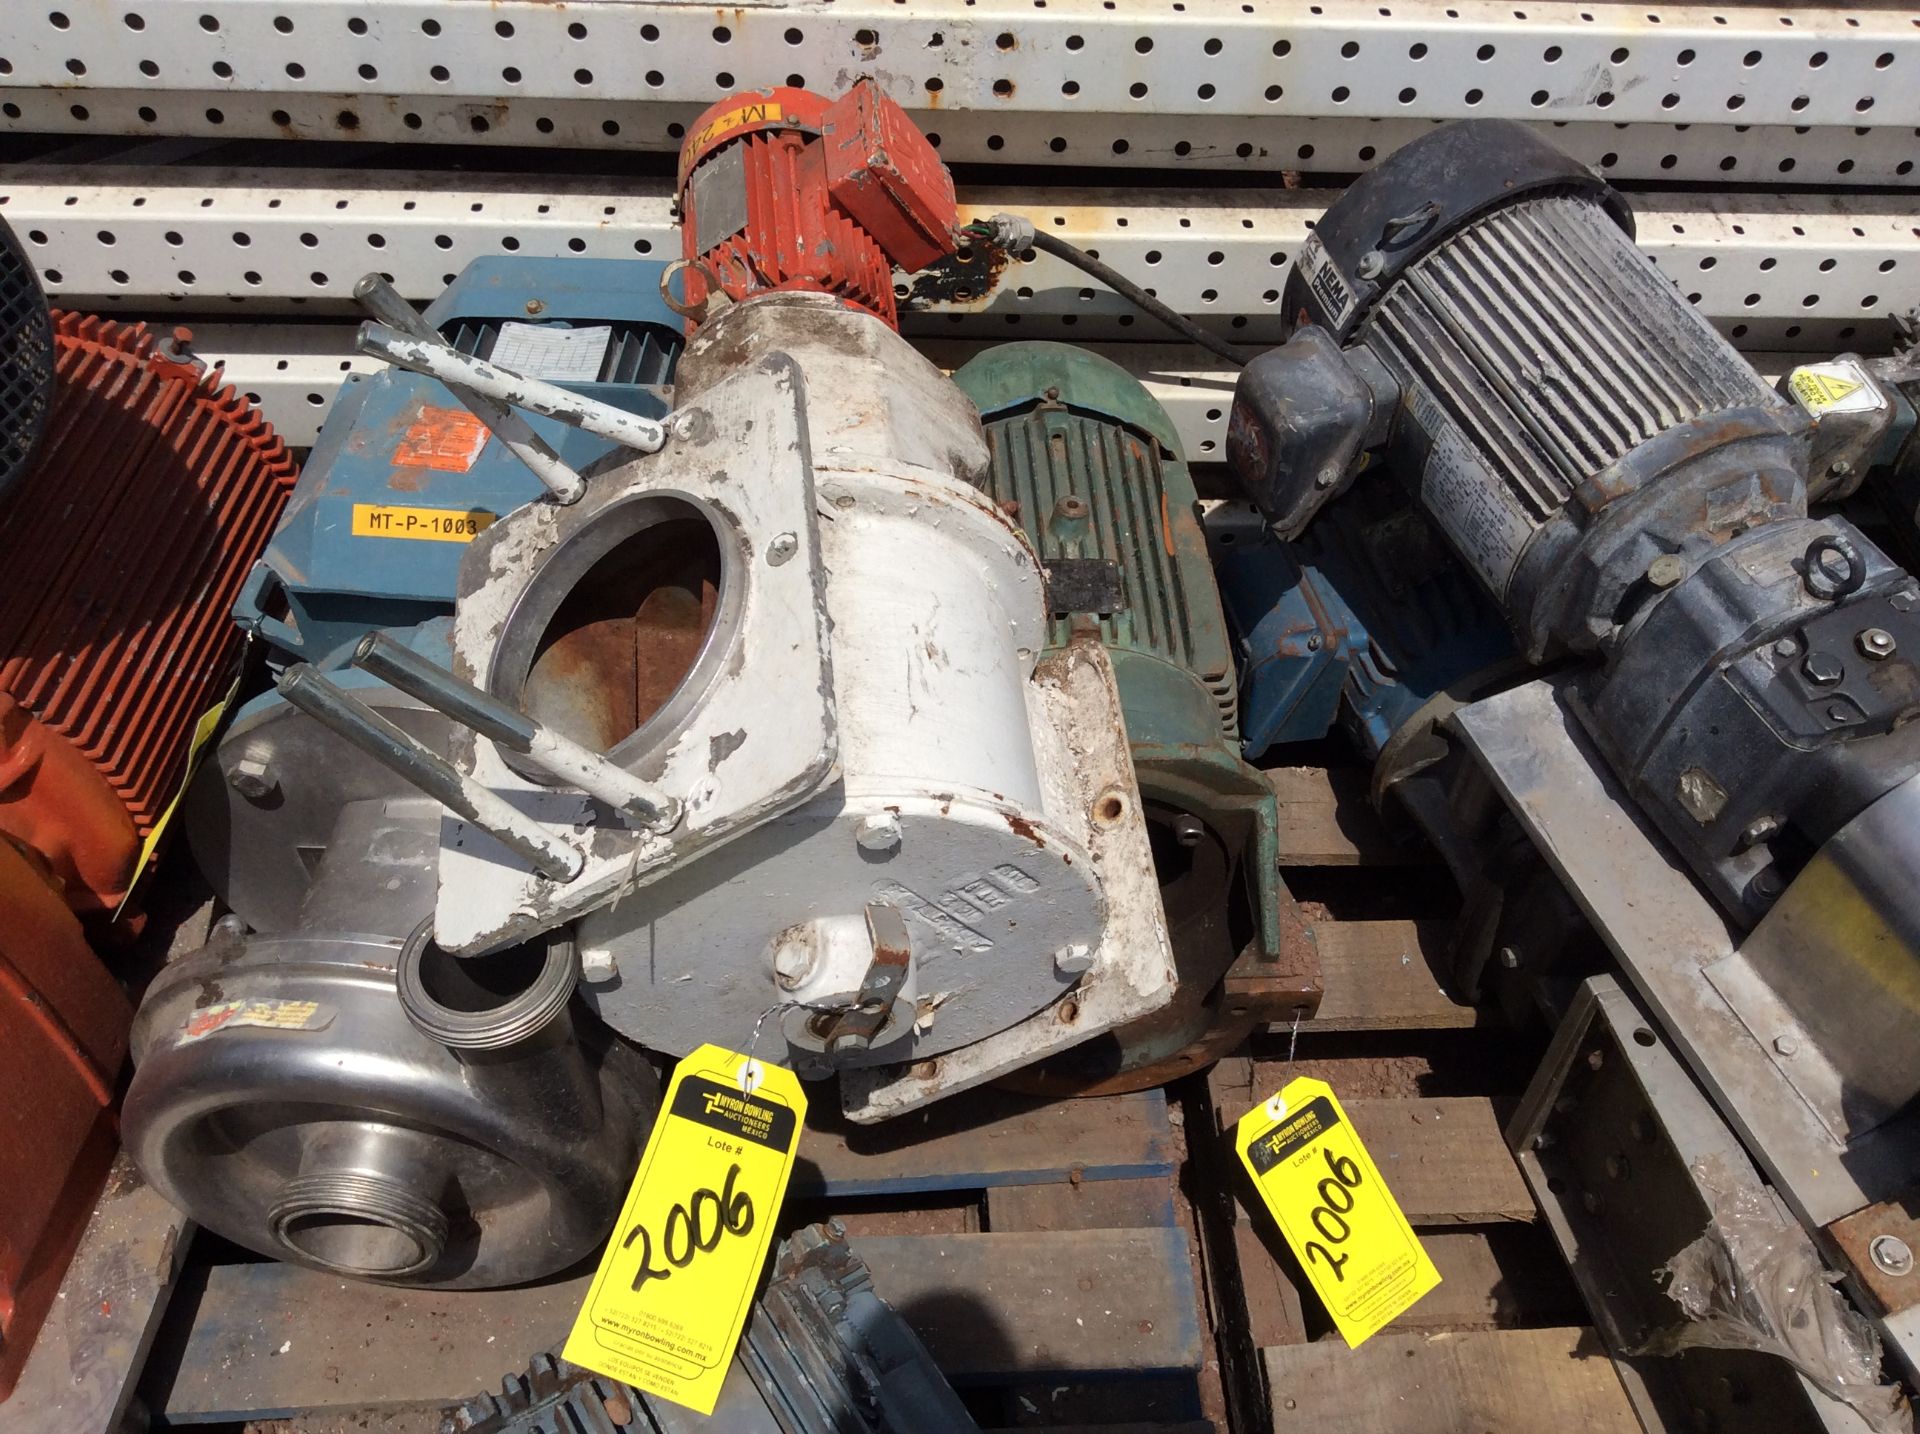 WEG motor, model 00718EP213T 7HP, 1 14 HP motor without plate - Image 25 of 26